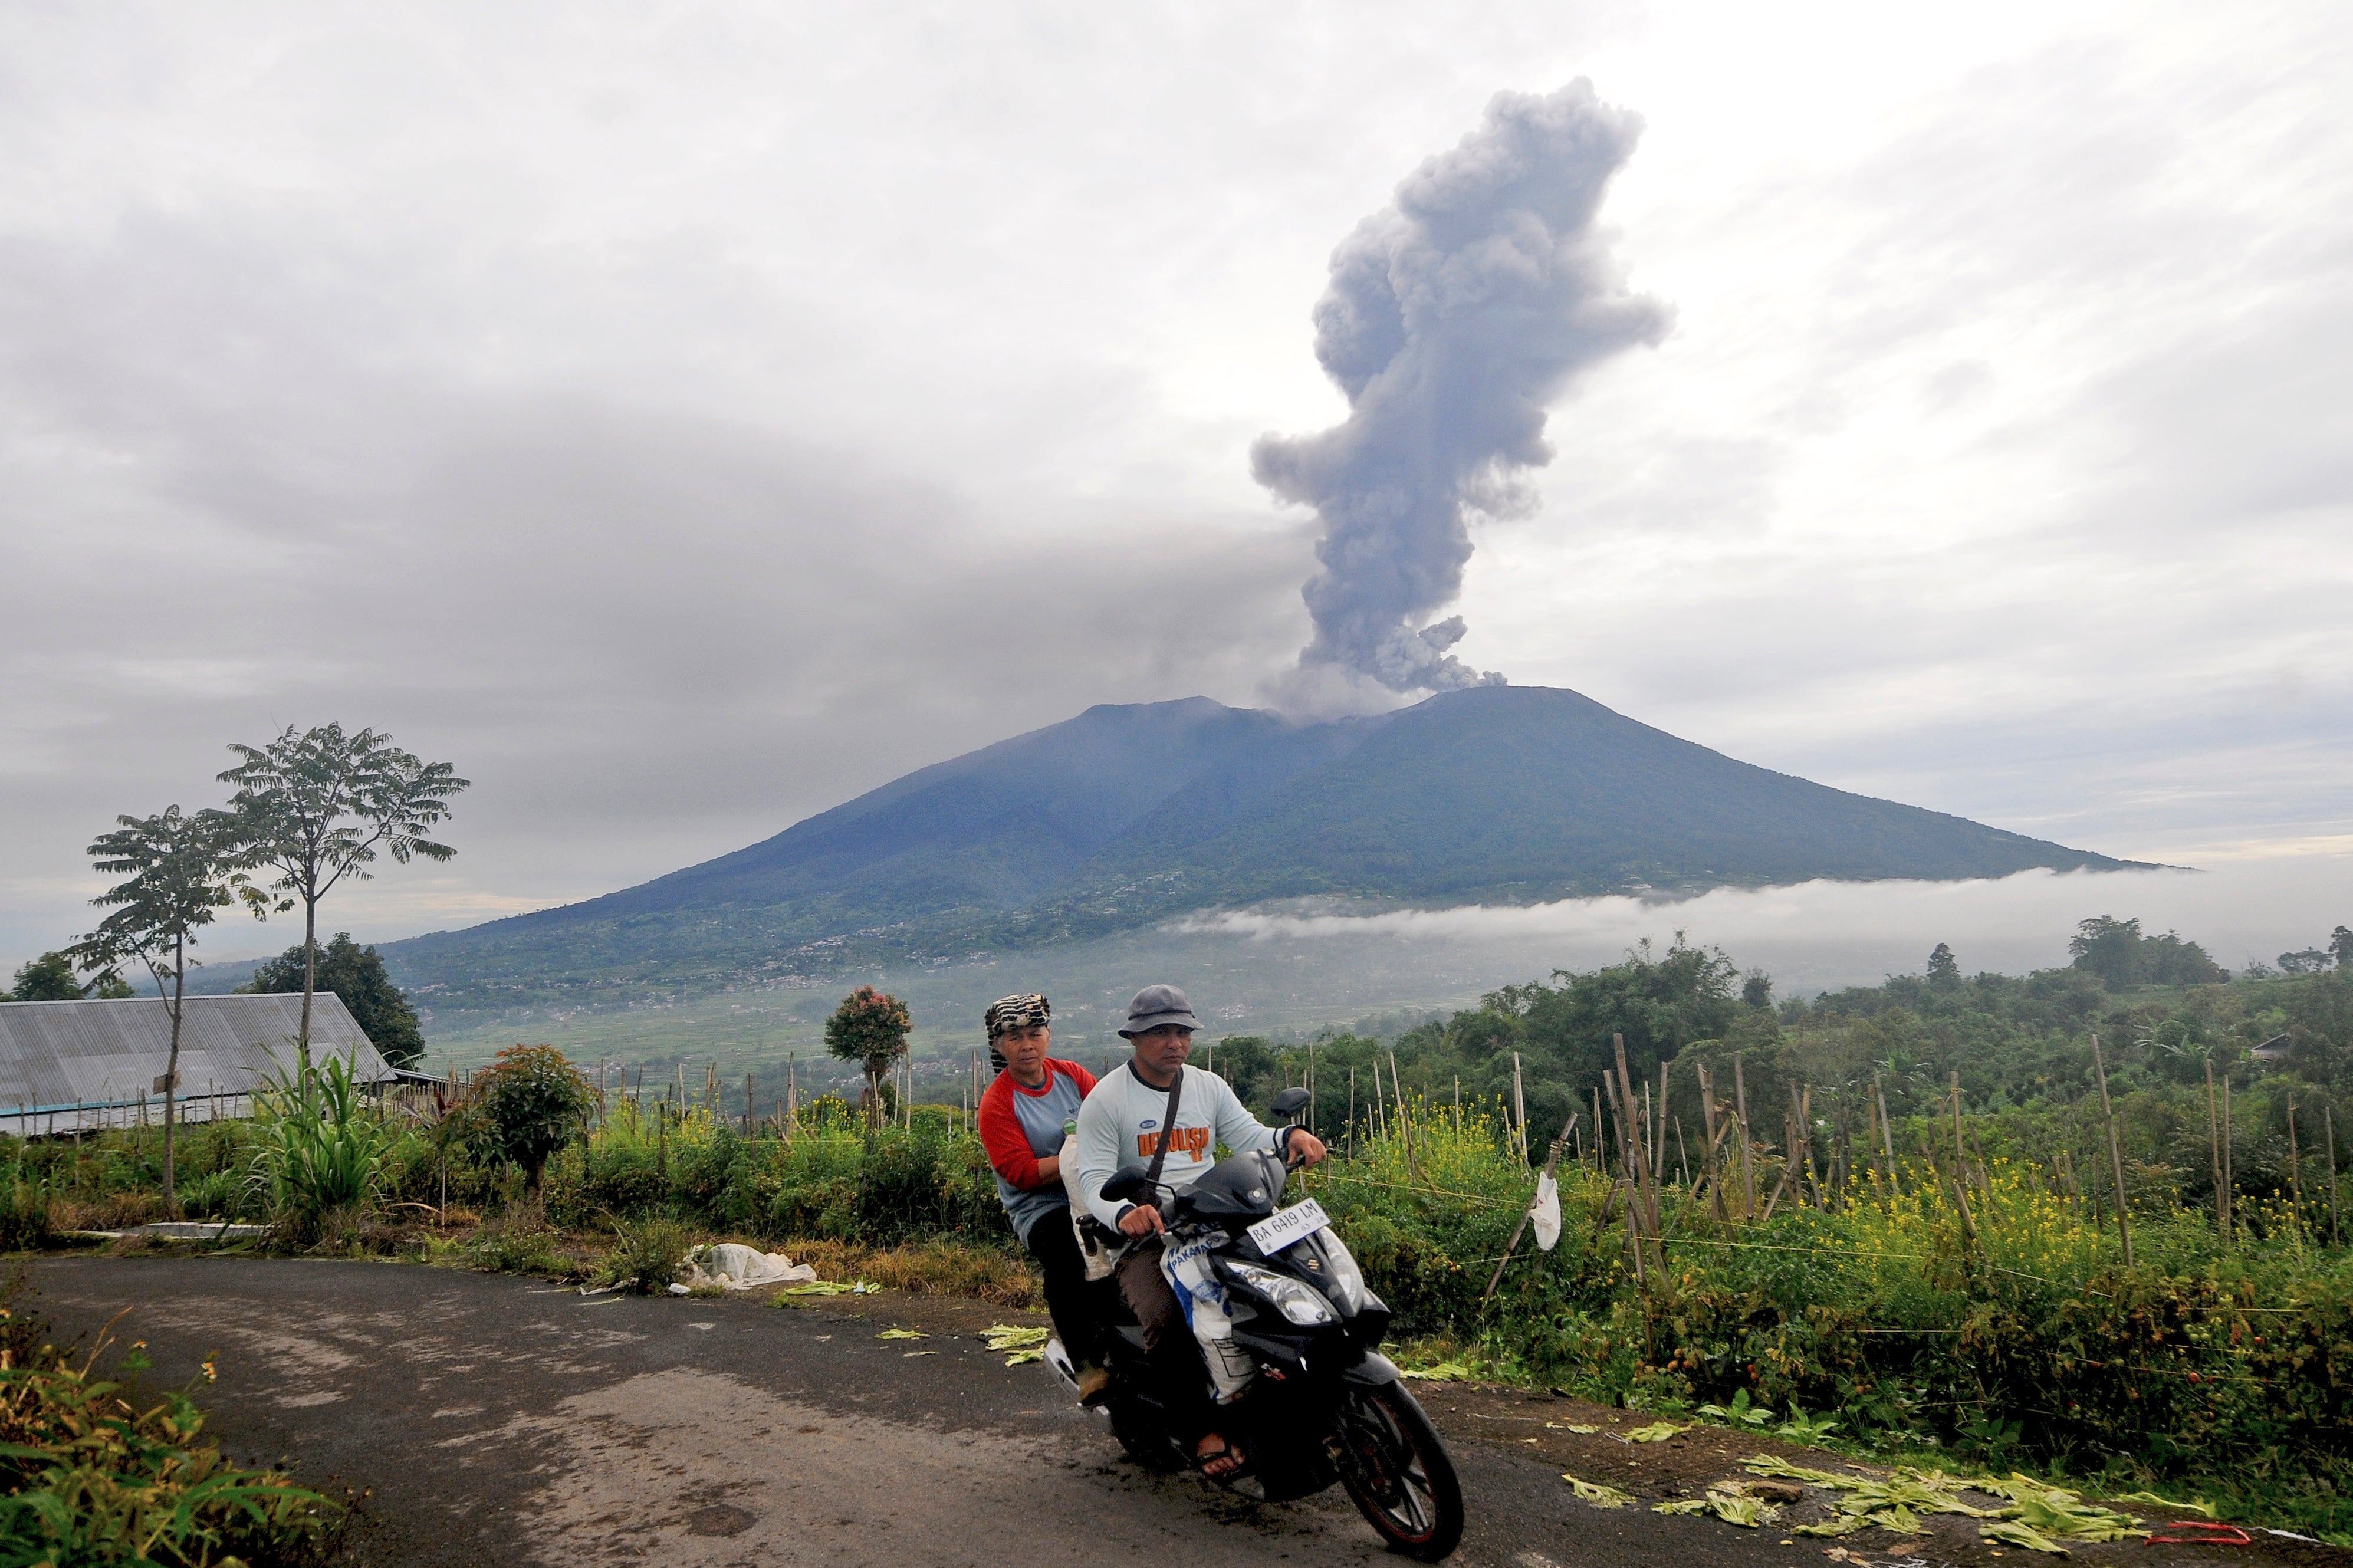 Motorists ride past by as Mount Marapi spews volcanic materials during its eruption in Agam, West Sumatra